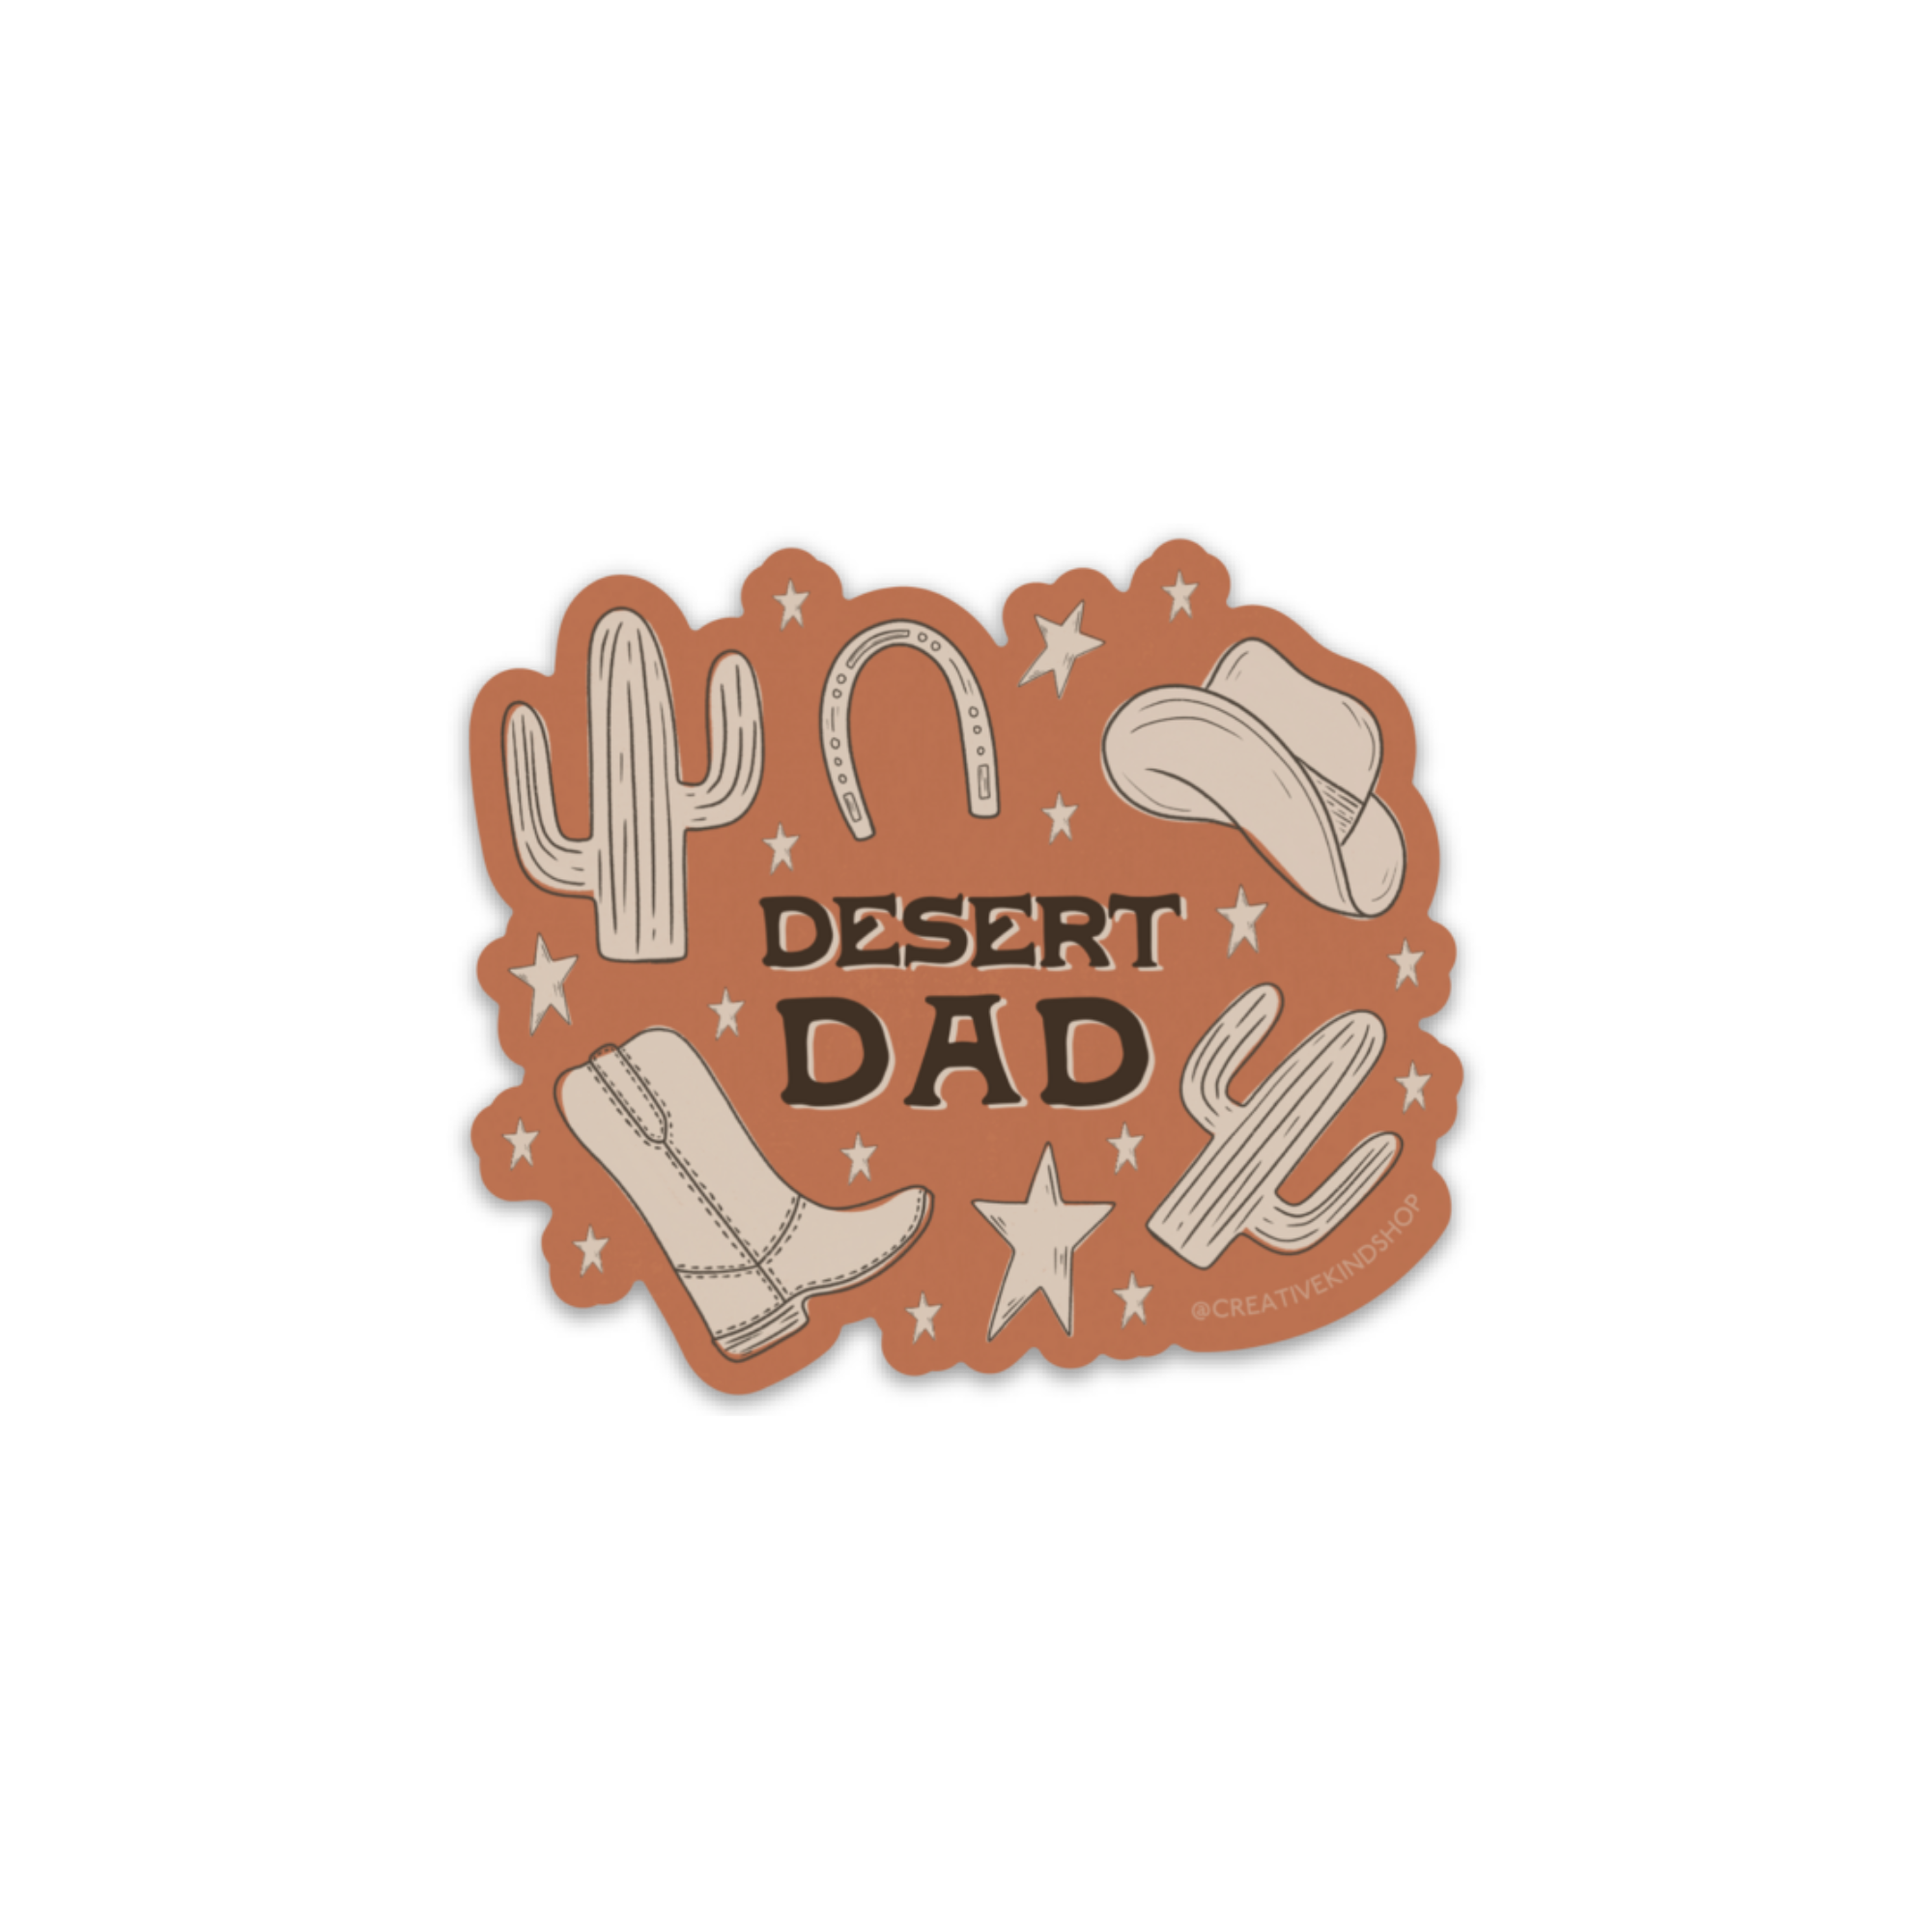 Die cut sticker with rusty orange background and the words "desert dad" surrounded by tan western doodles